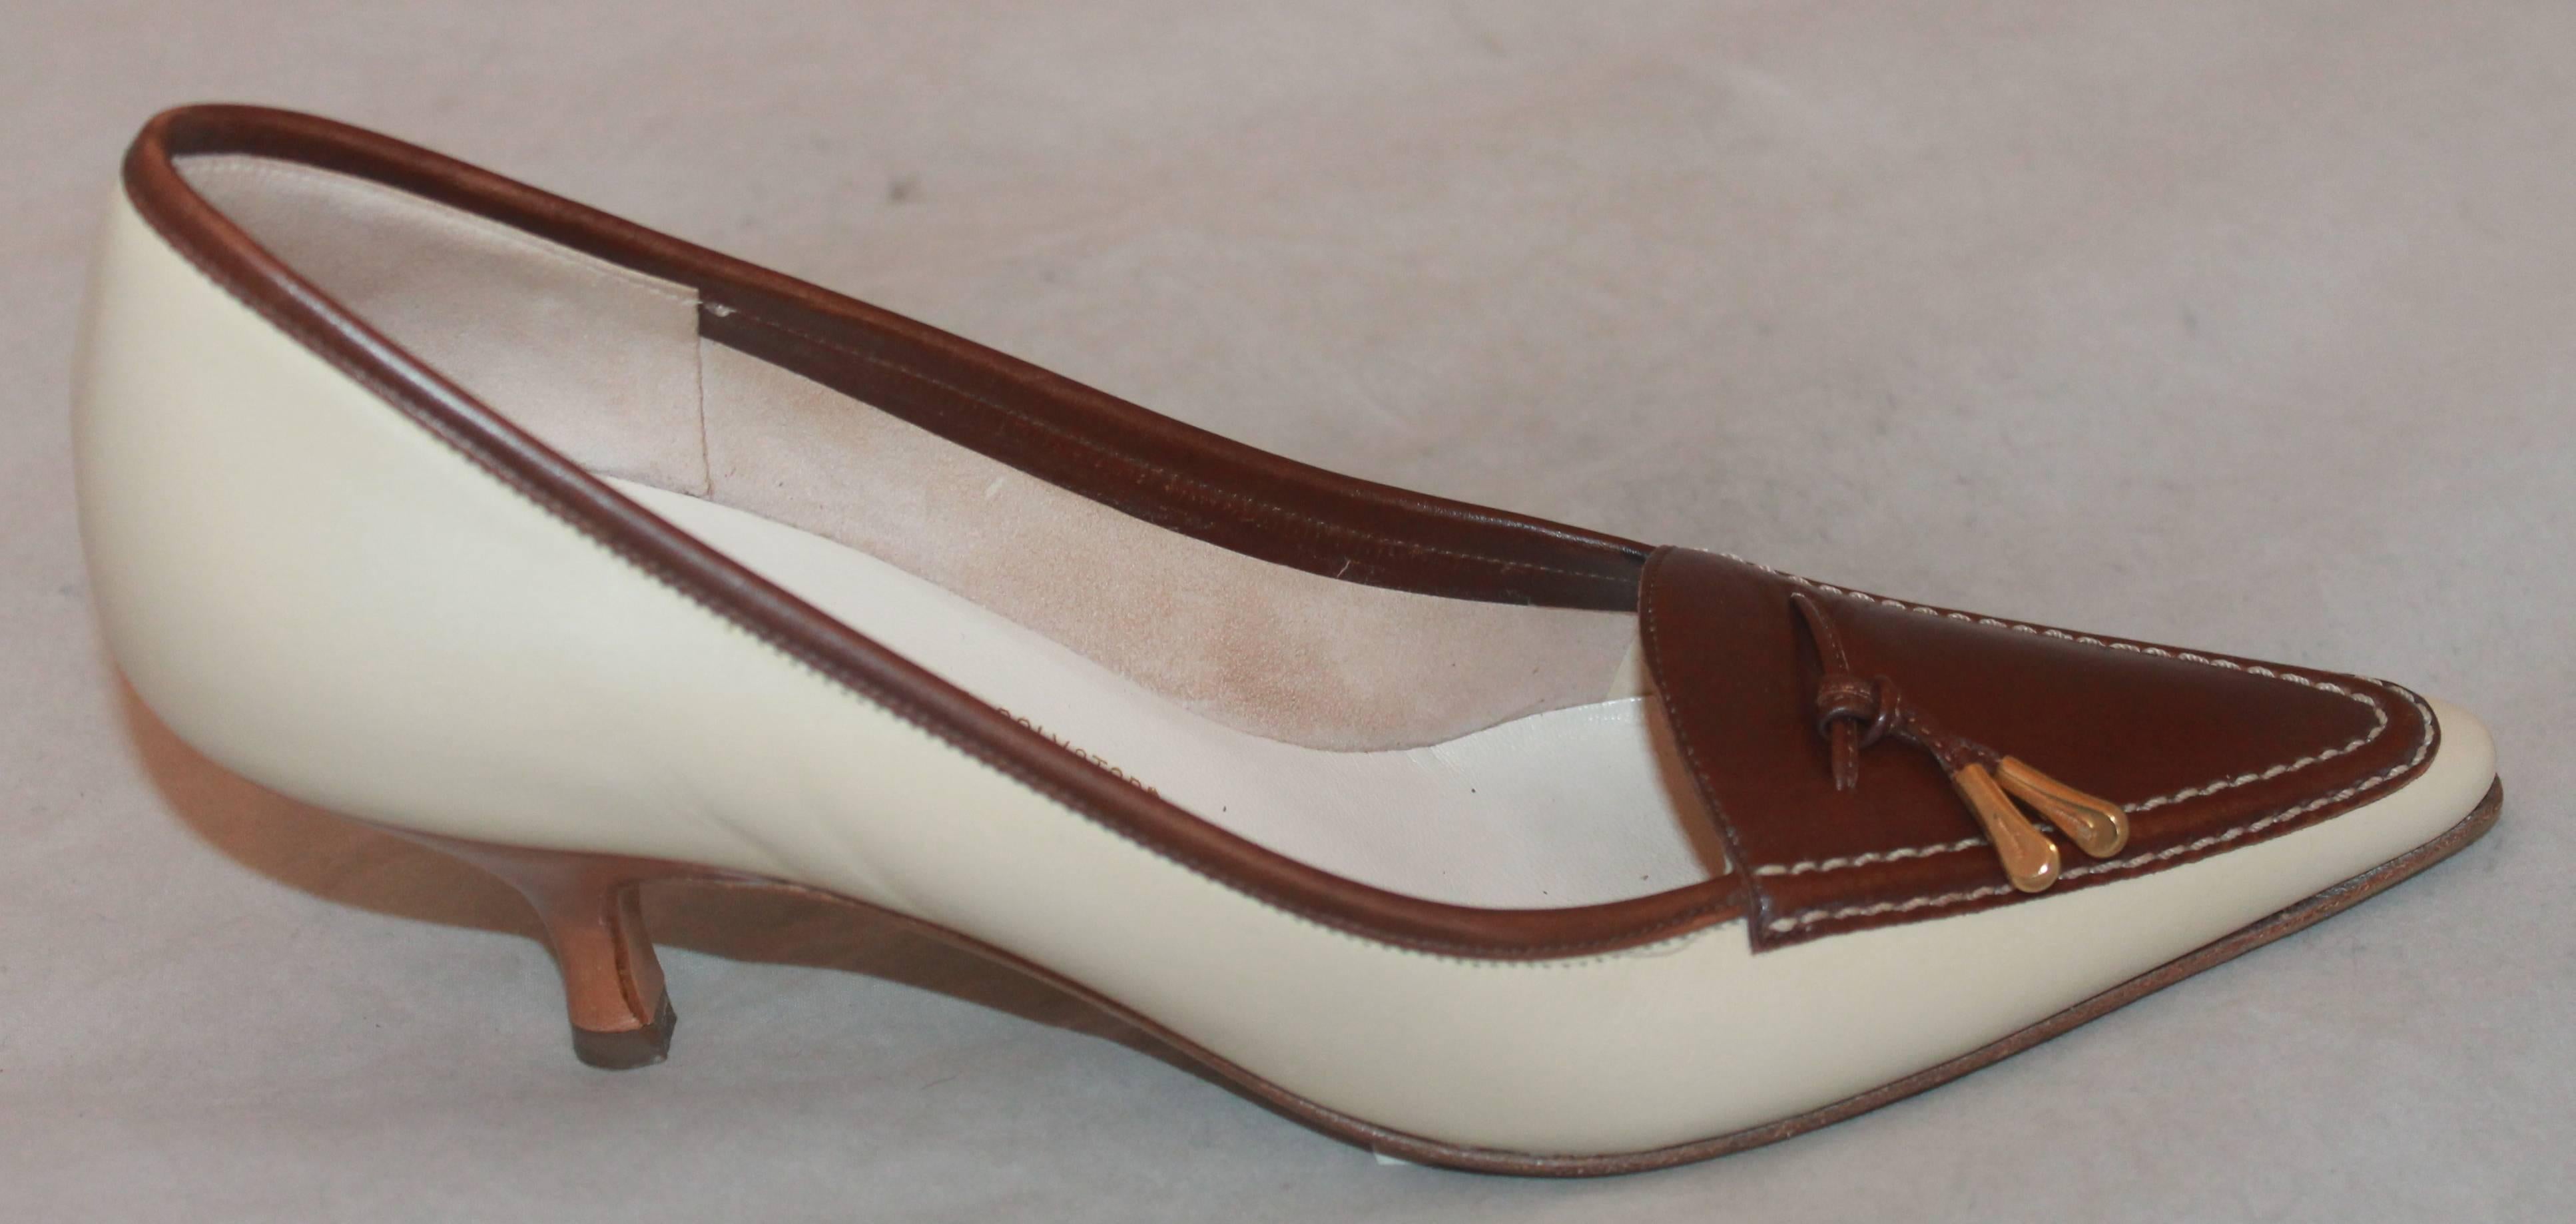 Salvatore Ferragamo Creme Loafer-Style Pumps w/ Brown Trim & Gold Tassel - 7AA.  These classy shoes are in excellent condition.  They feature a lovely crème leather, a brown leather trim, a classic loafer-style, kitten heels, and a brown leather